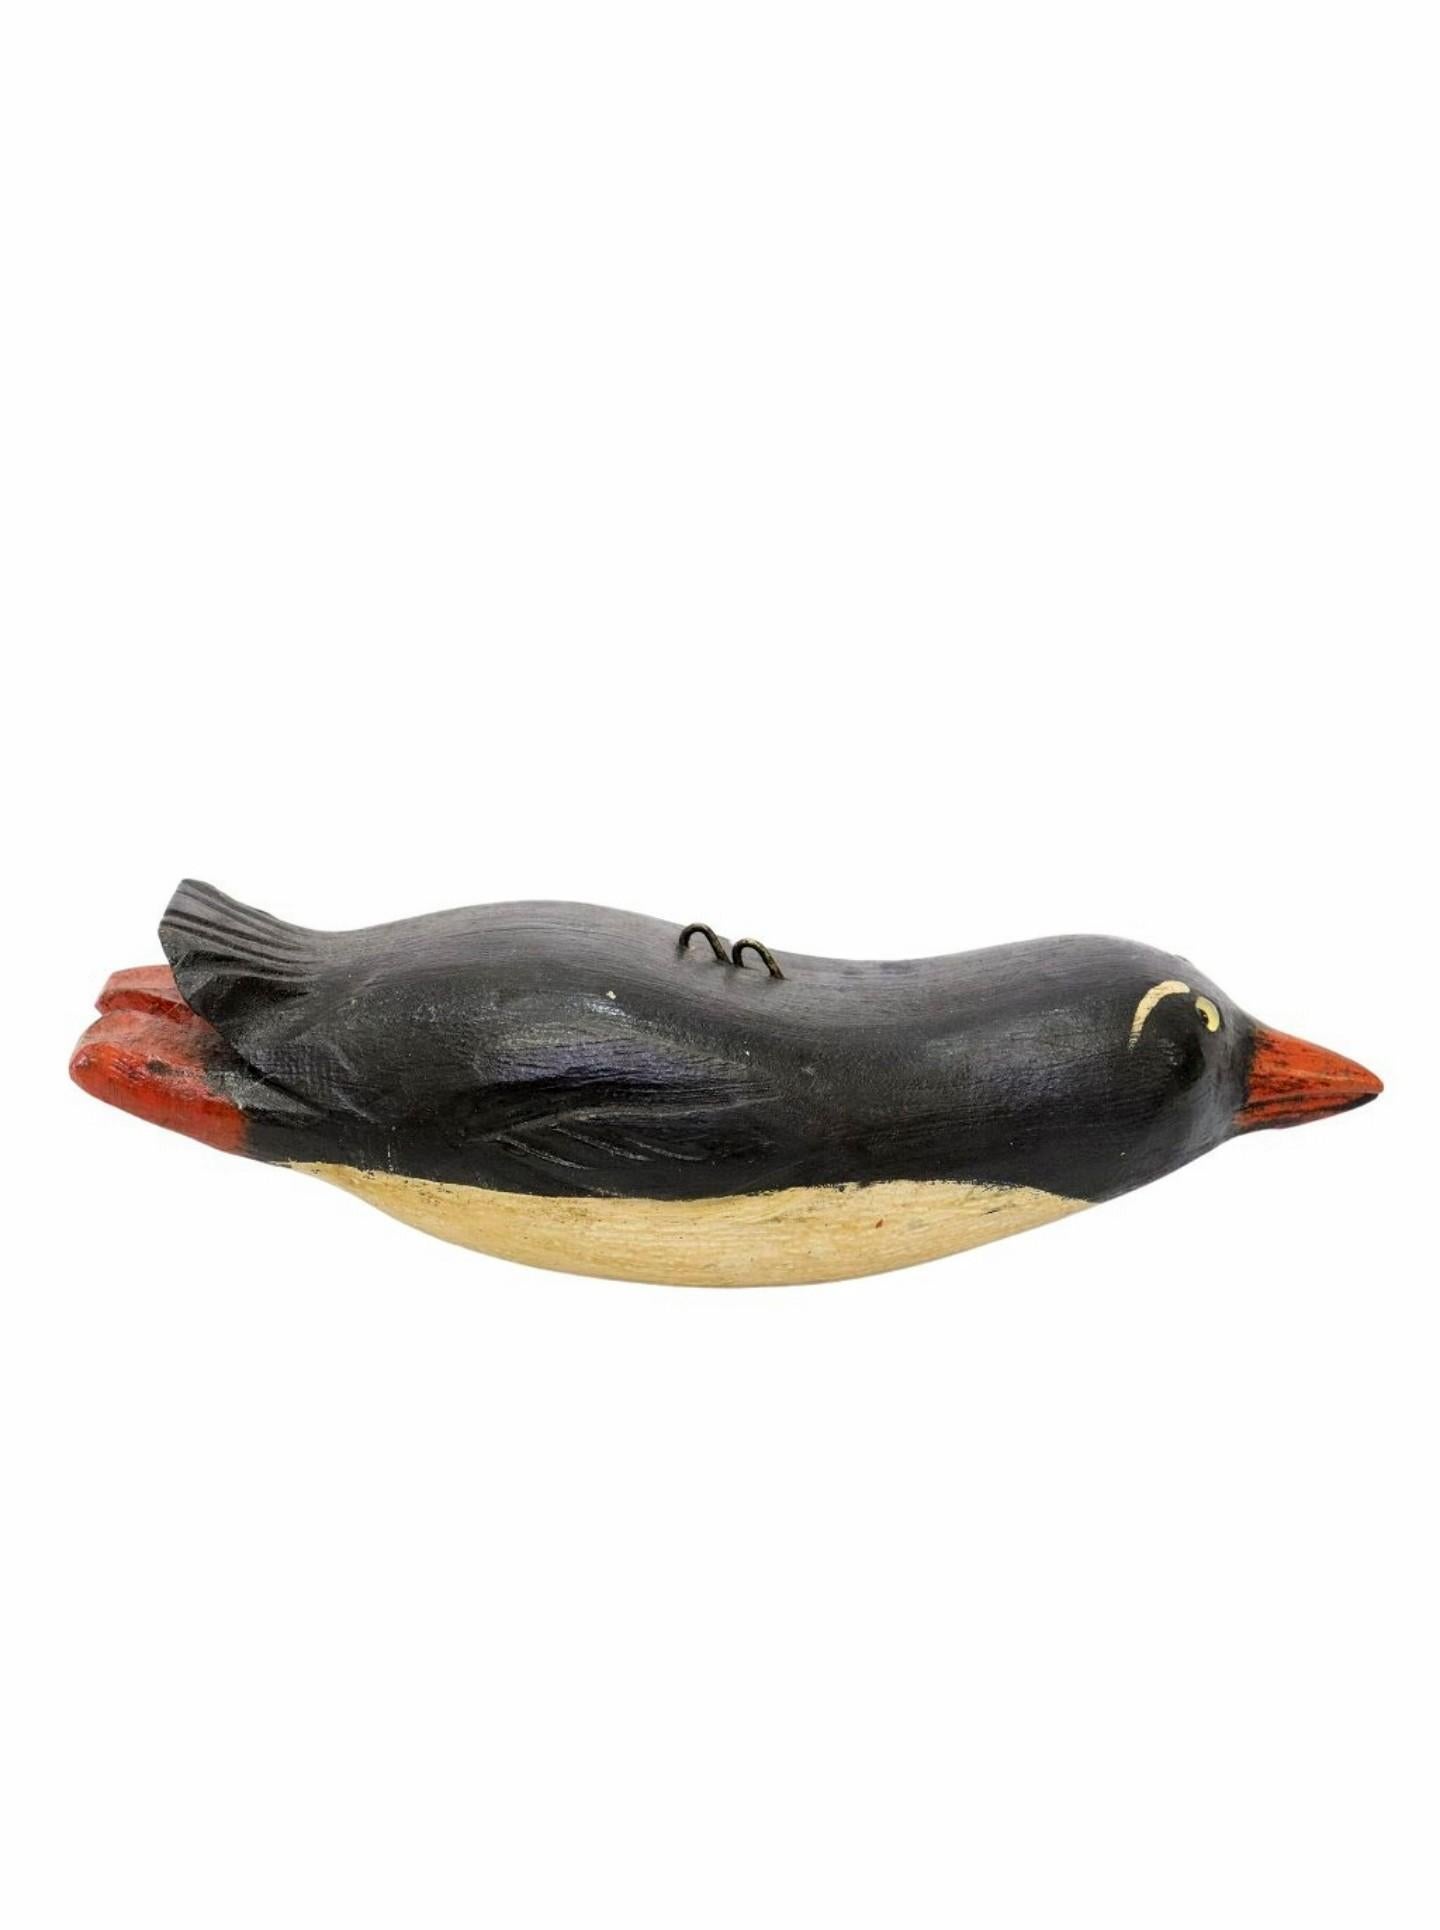 A large rare, one-of-a-kind, Duluth Fish Decoy American folk art sculpture, depicting diving penguin, hand-carved by the late David Earl Perkins (Duluth, Minnesota, 1934-2018), featuring the original hand-painted finish with black body, white